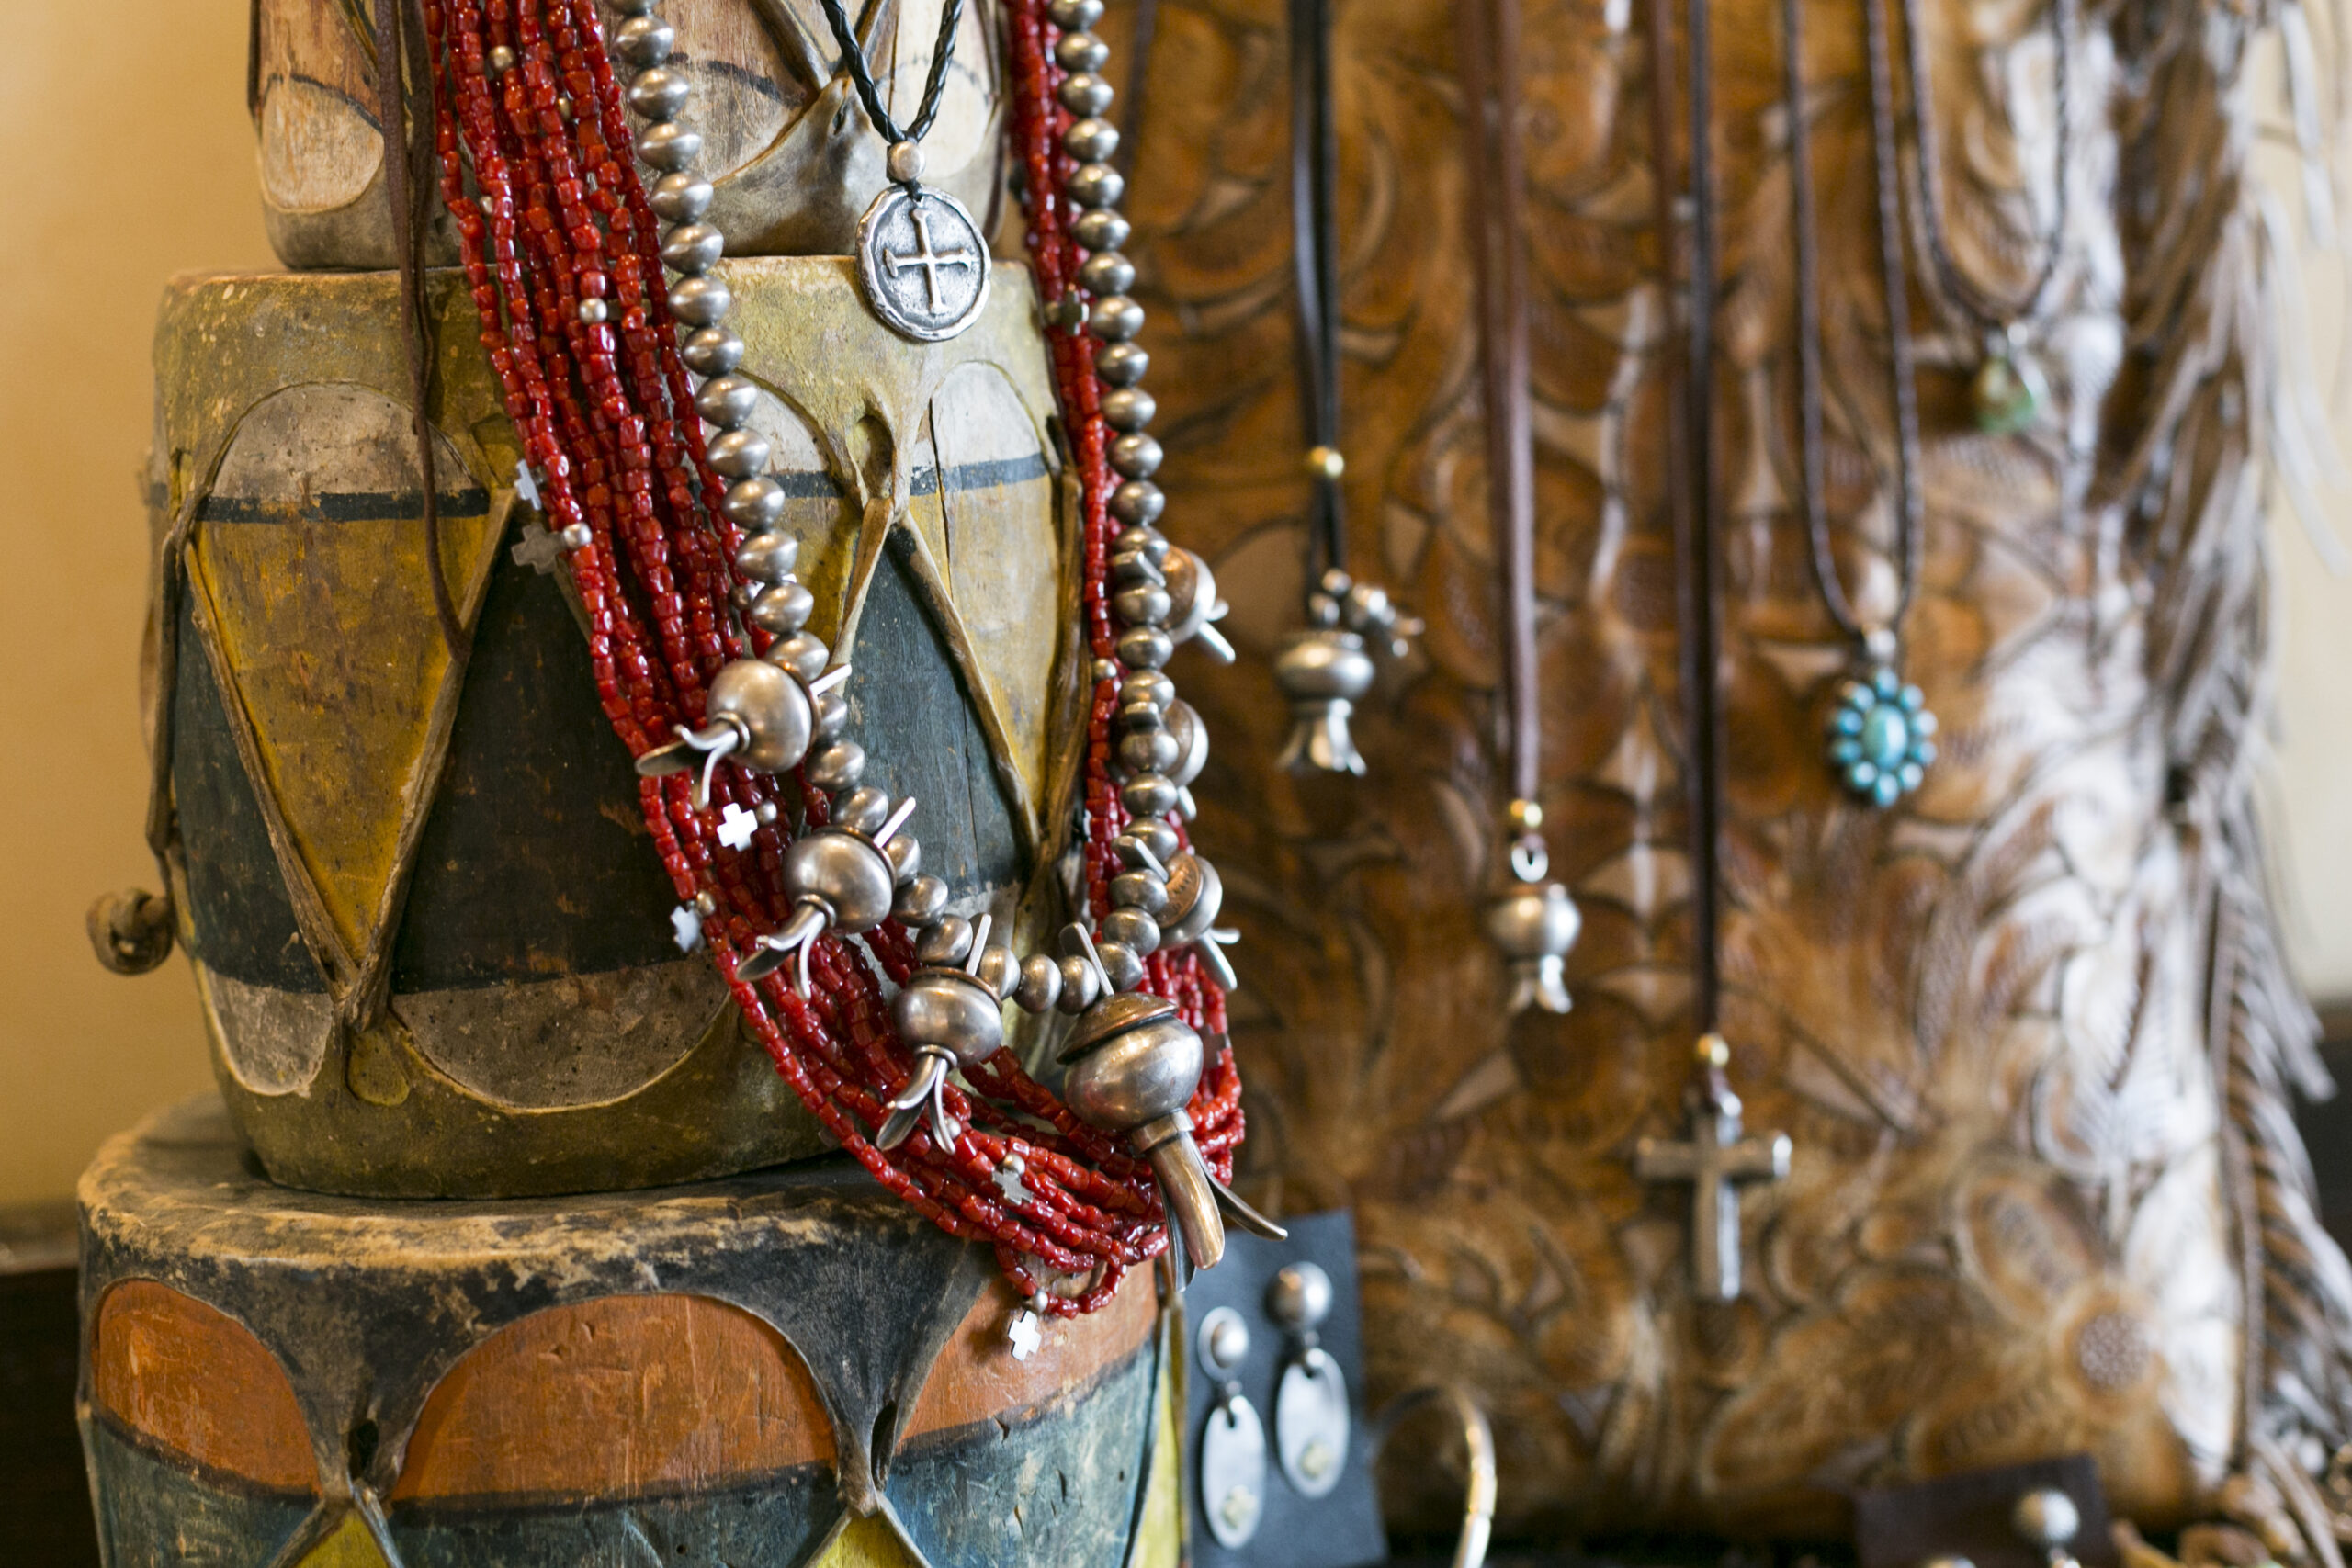 Jewelry created by Dennis Hogan,Pieces of metal used in the creation of Dennis Hogan's jewelry, preserving heritage southwest design